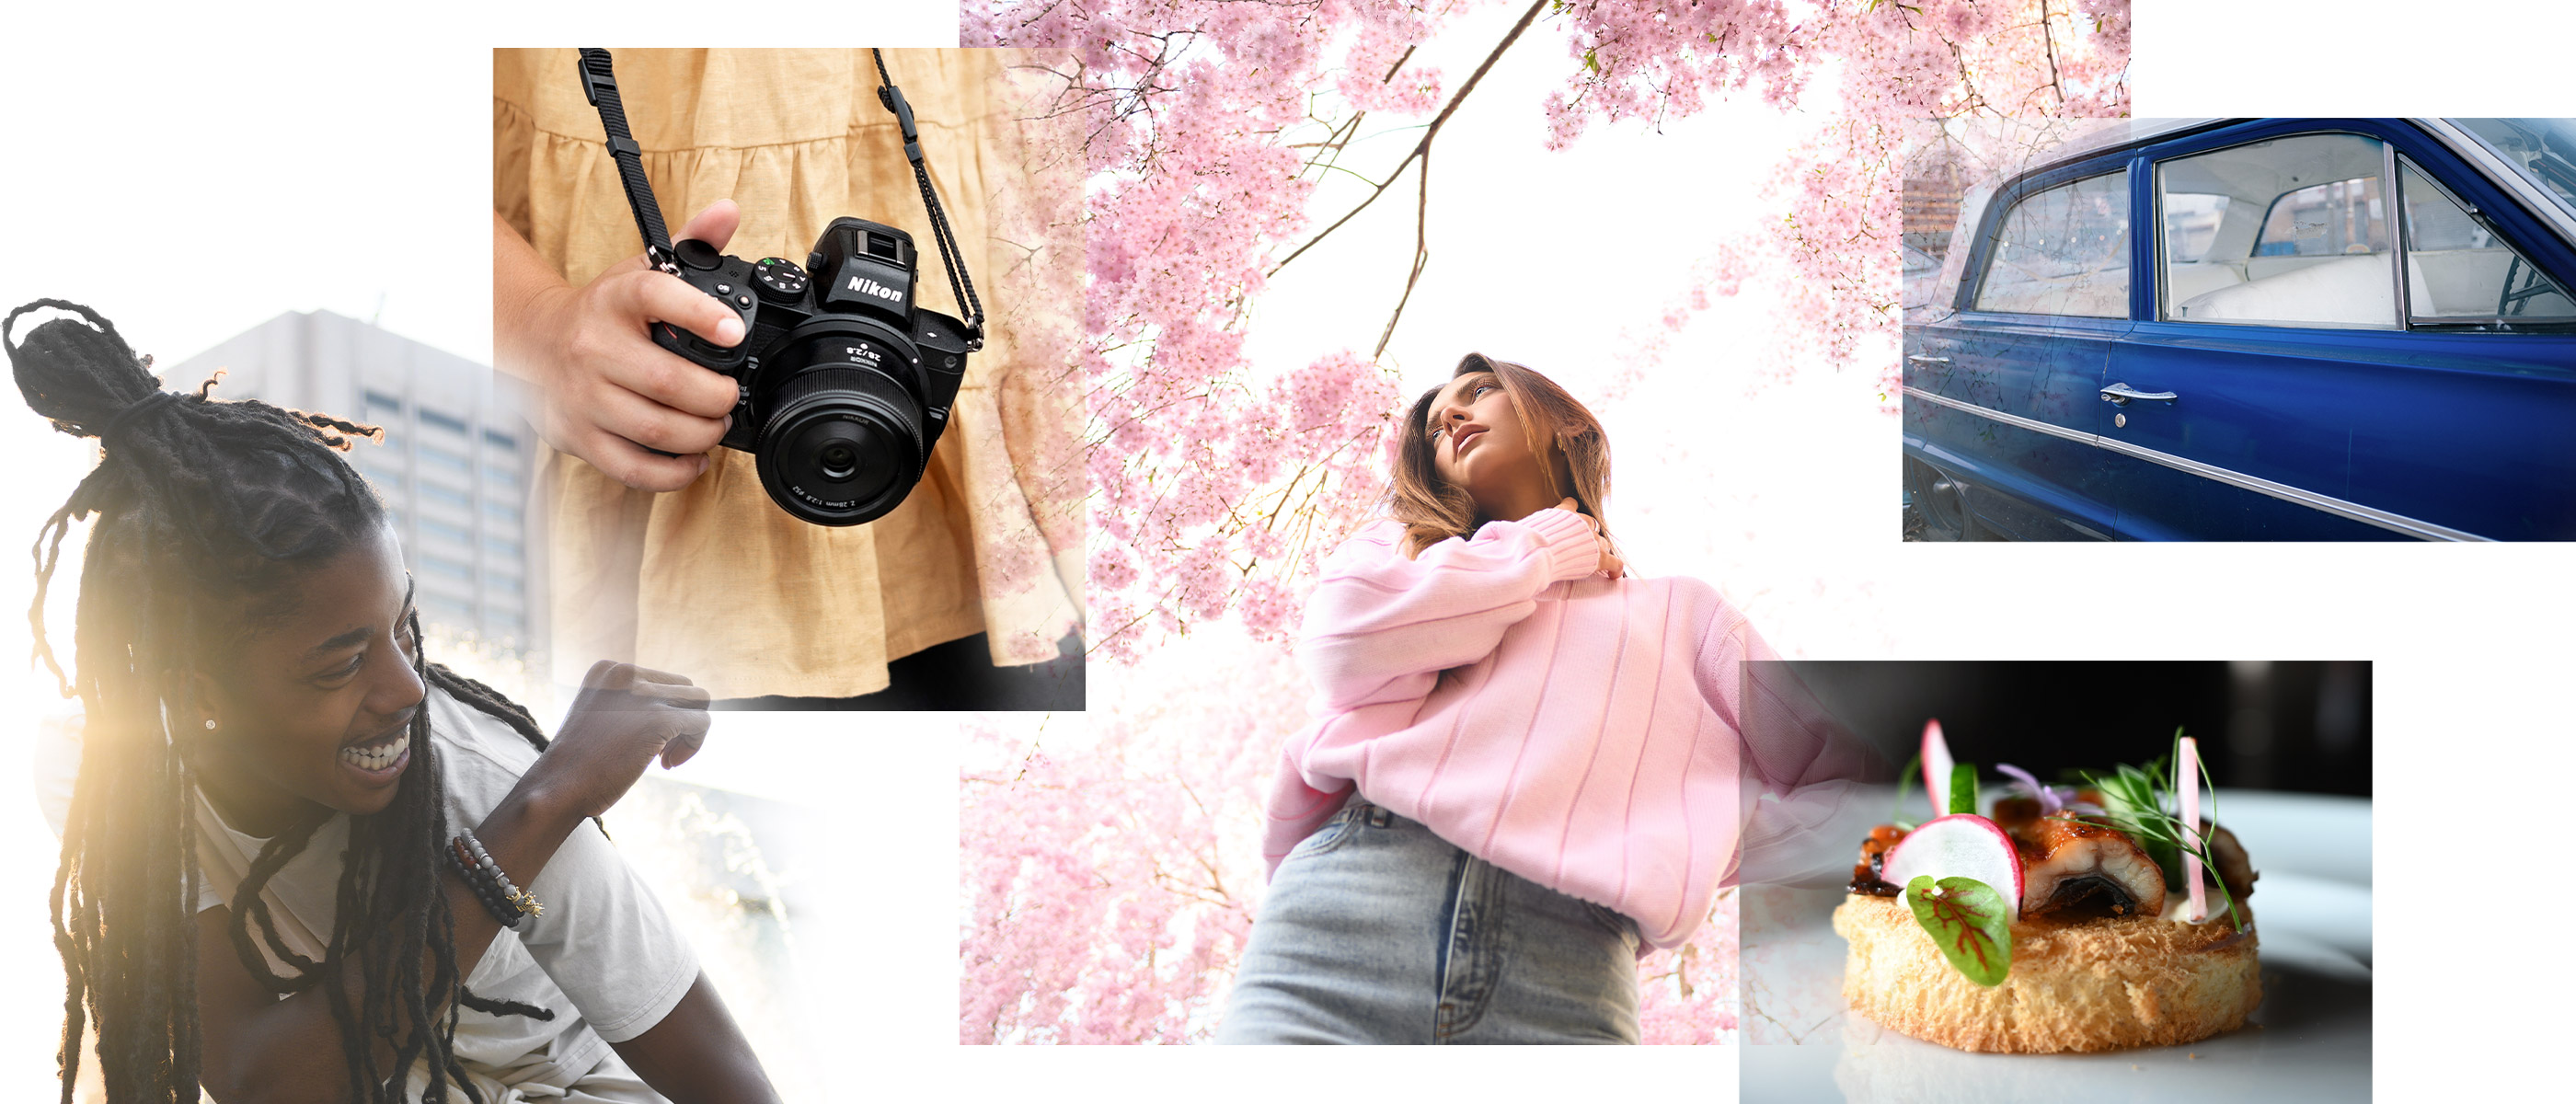 Collage of photos of a person holding a camera, a person in a pink sweater, a blue car door, food and a person smiling, taken with the NIKKOR Z 28mm f/2.8 lens